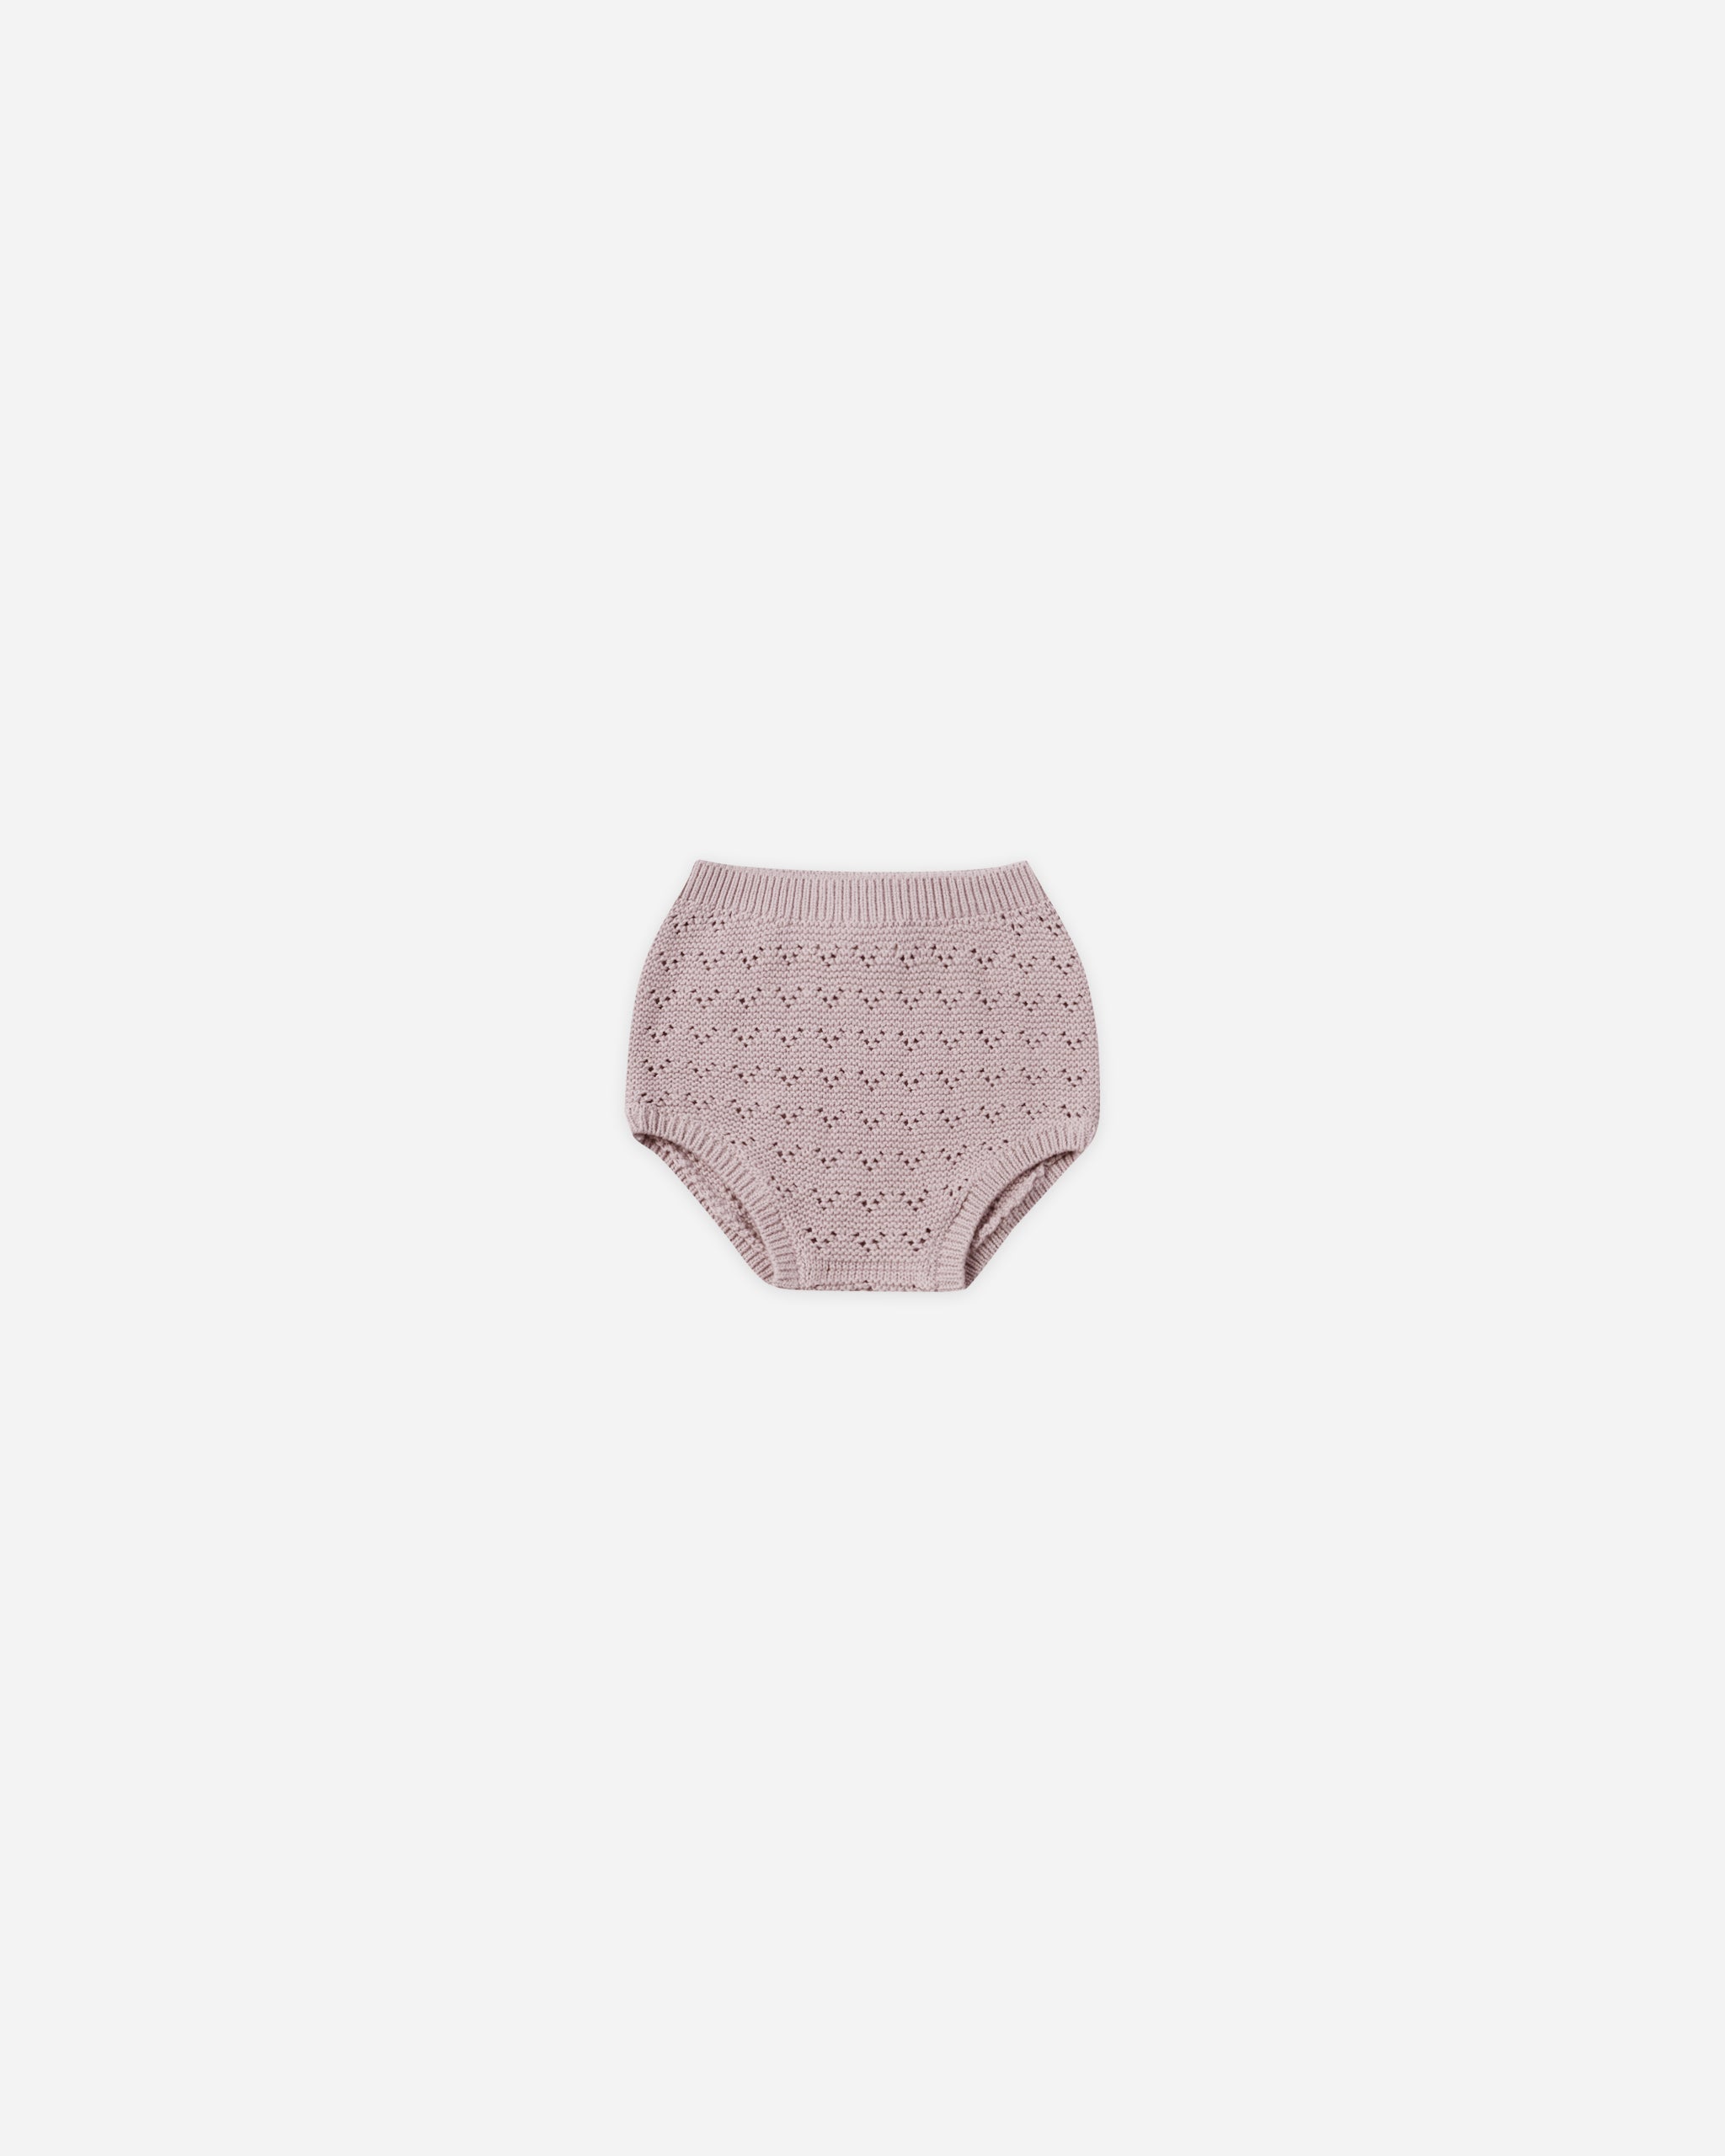 Knit Bloomer || Lavender - Rylee + Cru | Kids Clothes | Trendy Baby Clothes | Modern Infant Outfits |